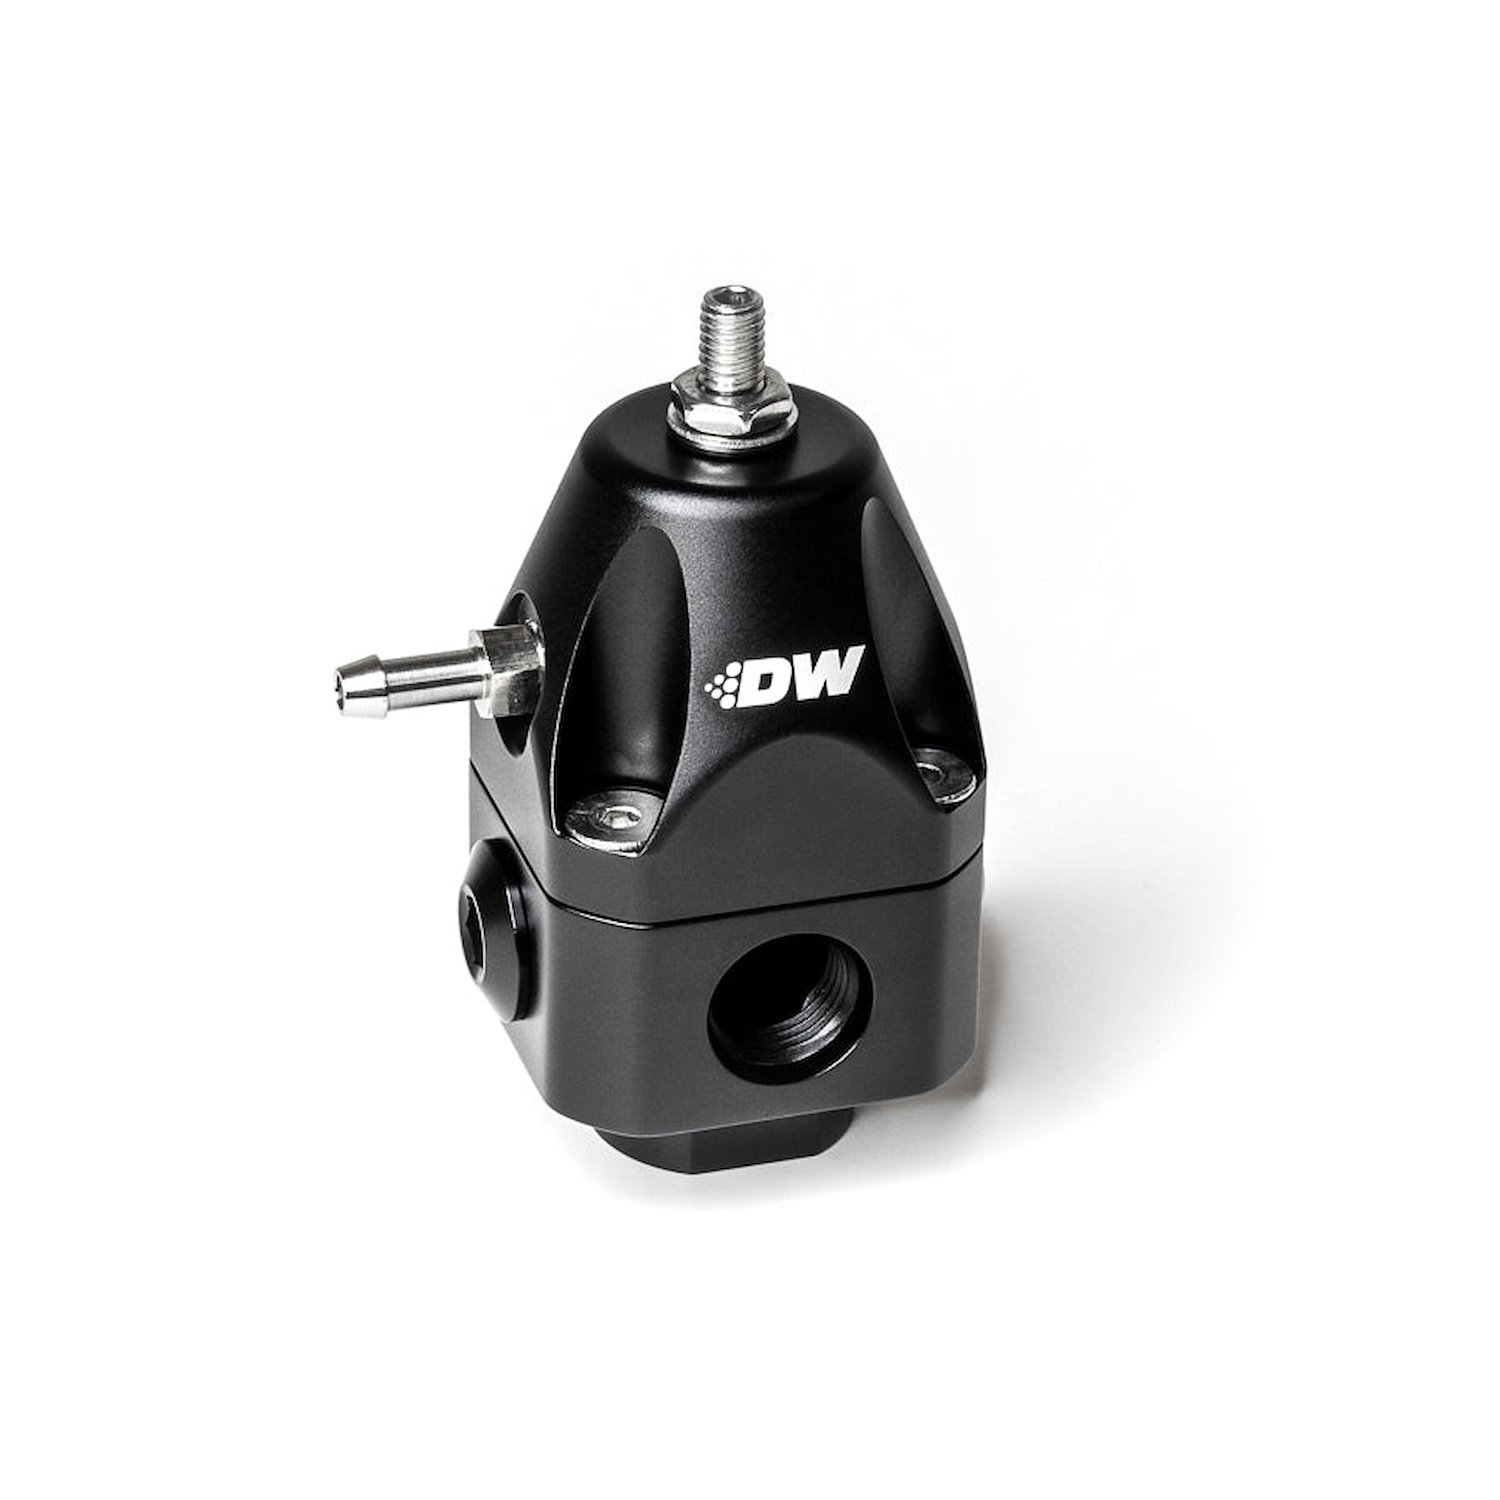 61002FRB DWR1000c adjustable fuel pressure regulator anodized black. Dual -6AN inlet and -6AN outlet. Universal fitment